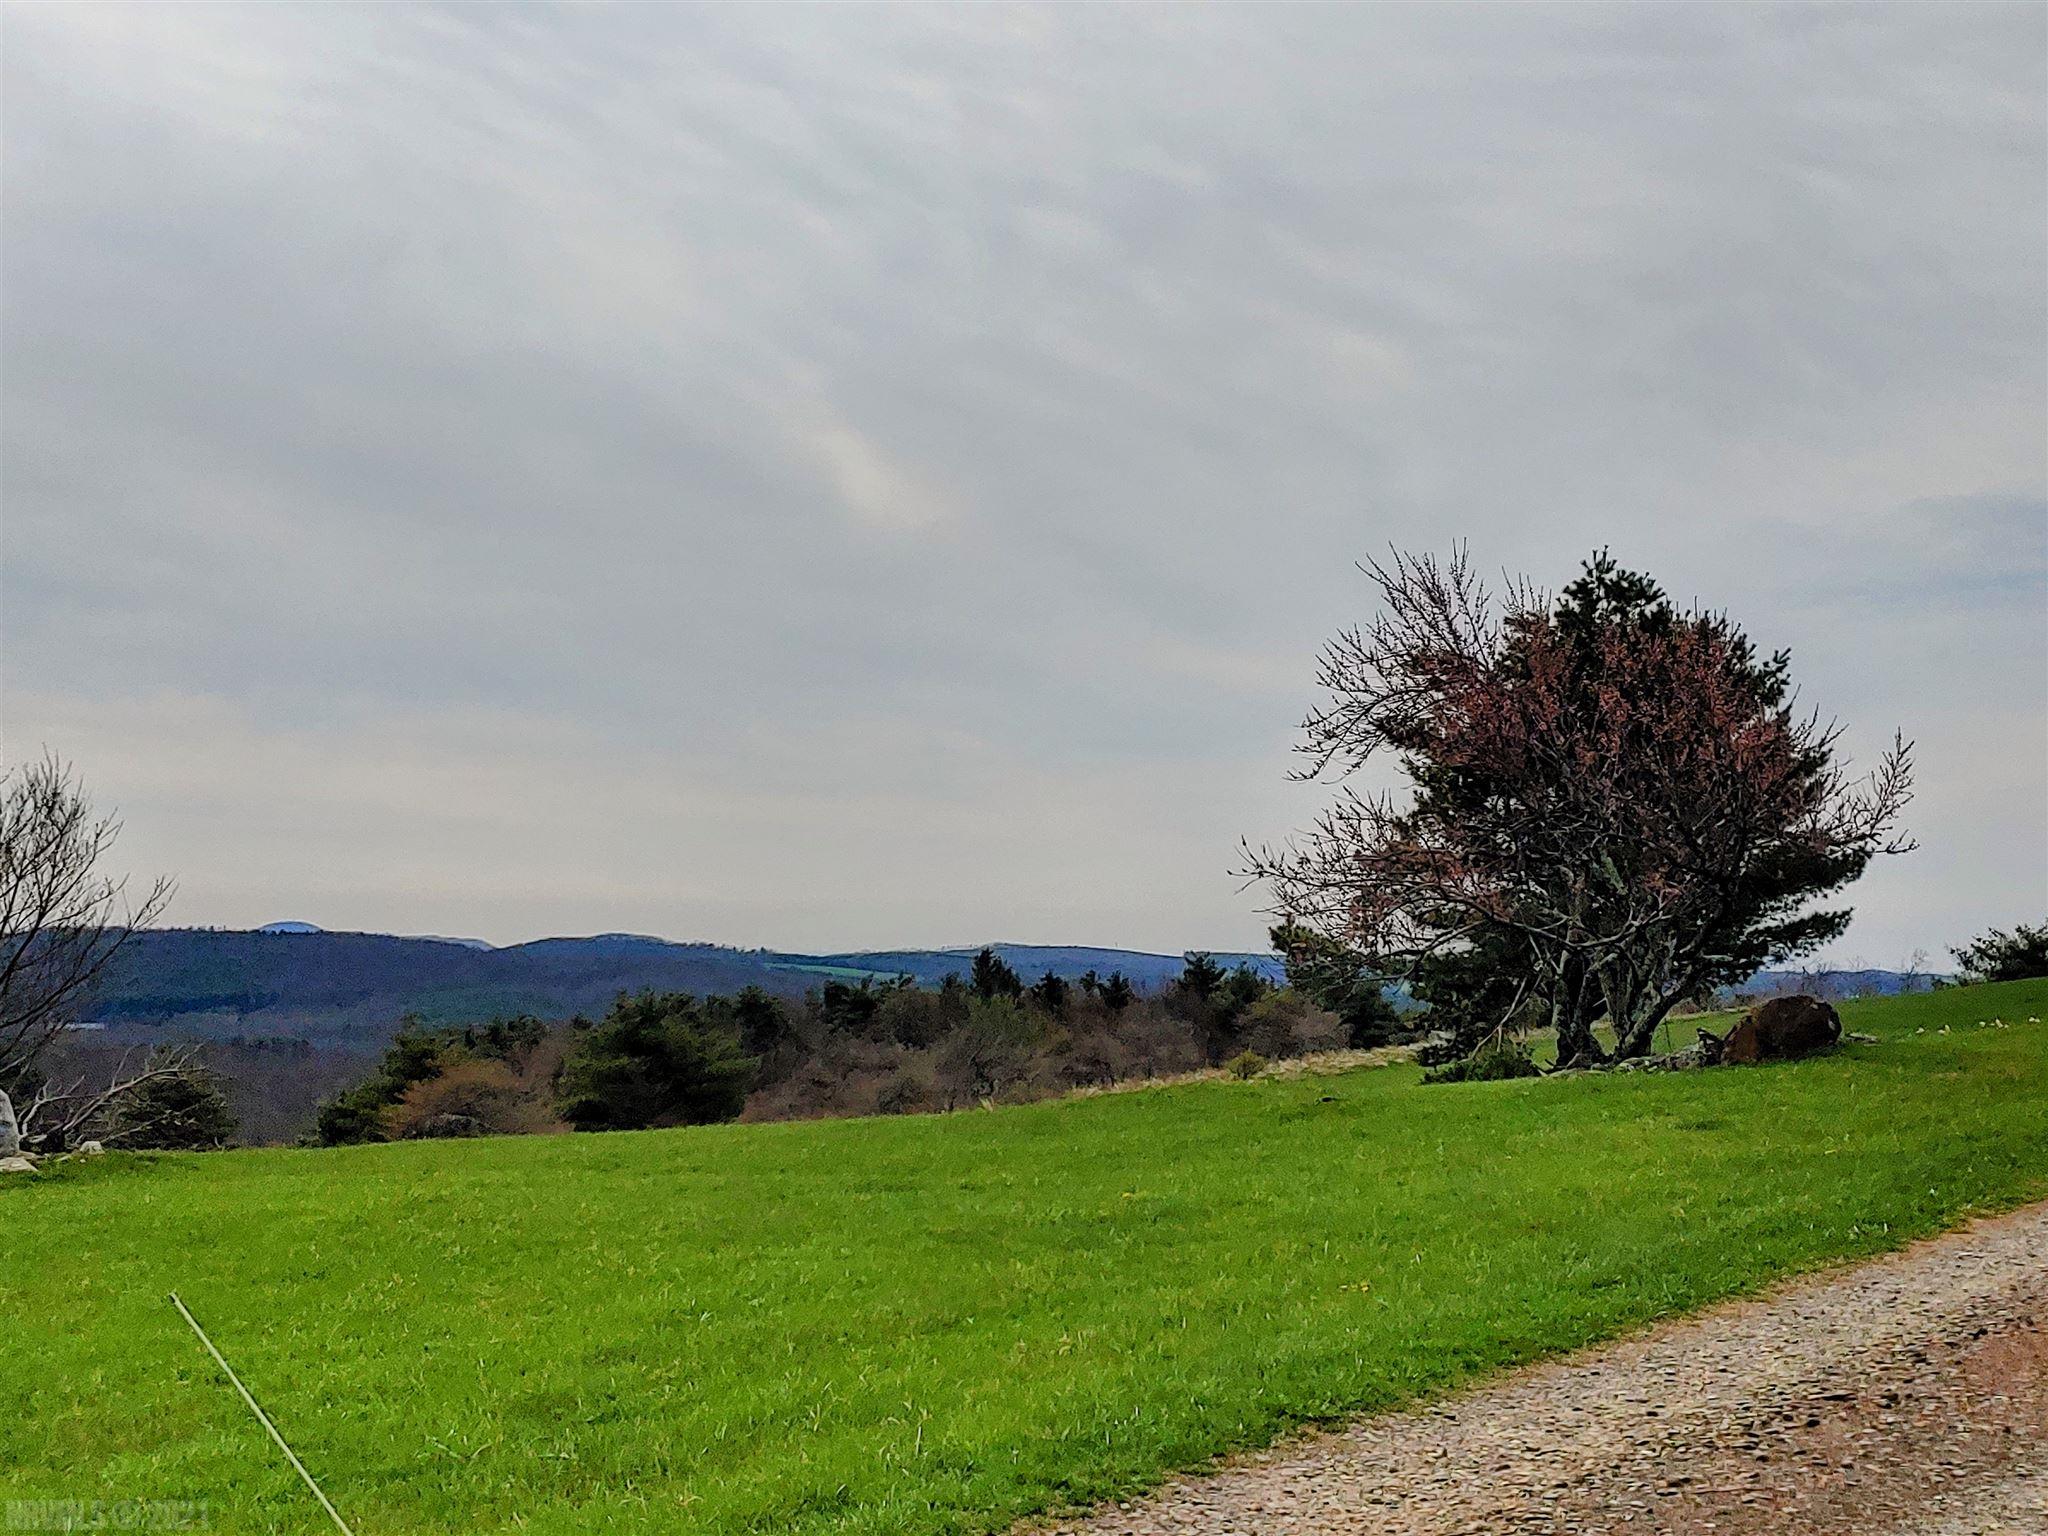 Enjoy the views from this ridge top property! Level 2.7 acre lot adjacent to the Blue Ridge Parkway. Just a few minutes to Hwy 58 and Chateau Morrisette Winery!